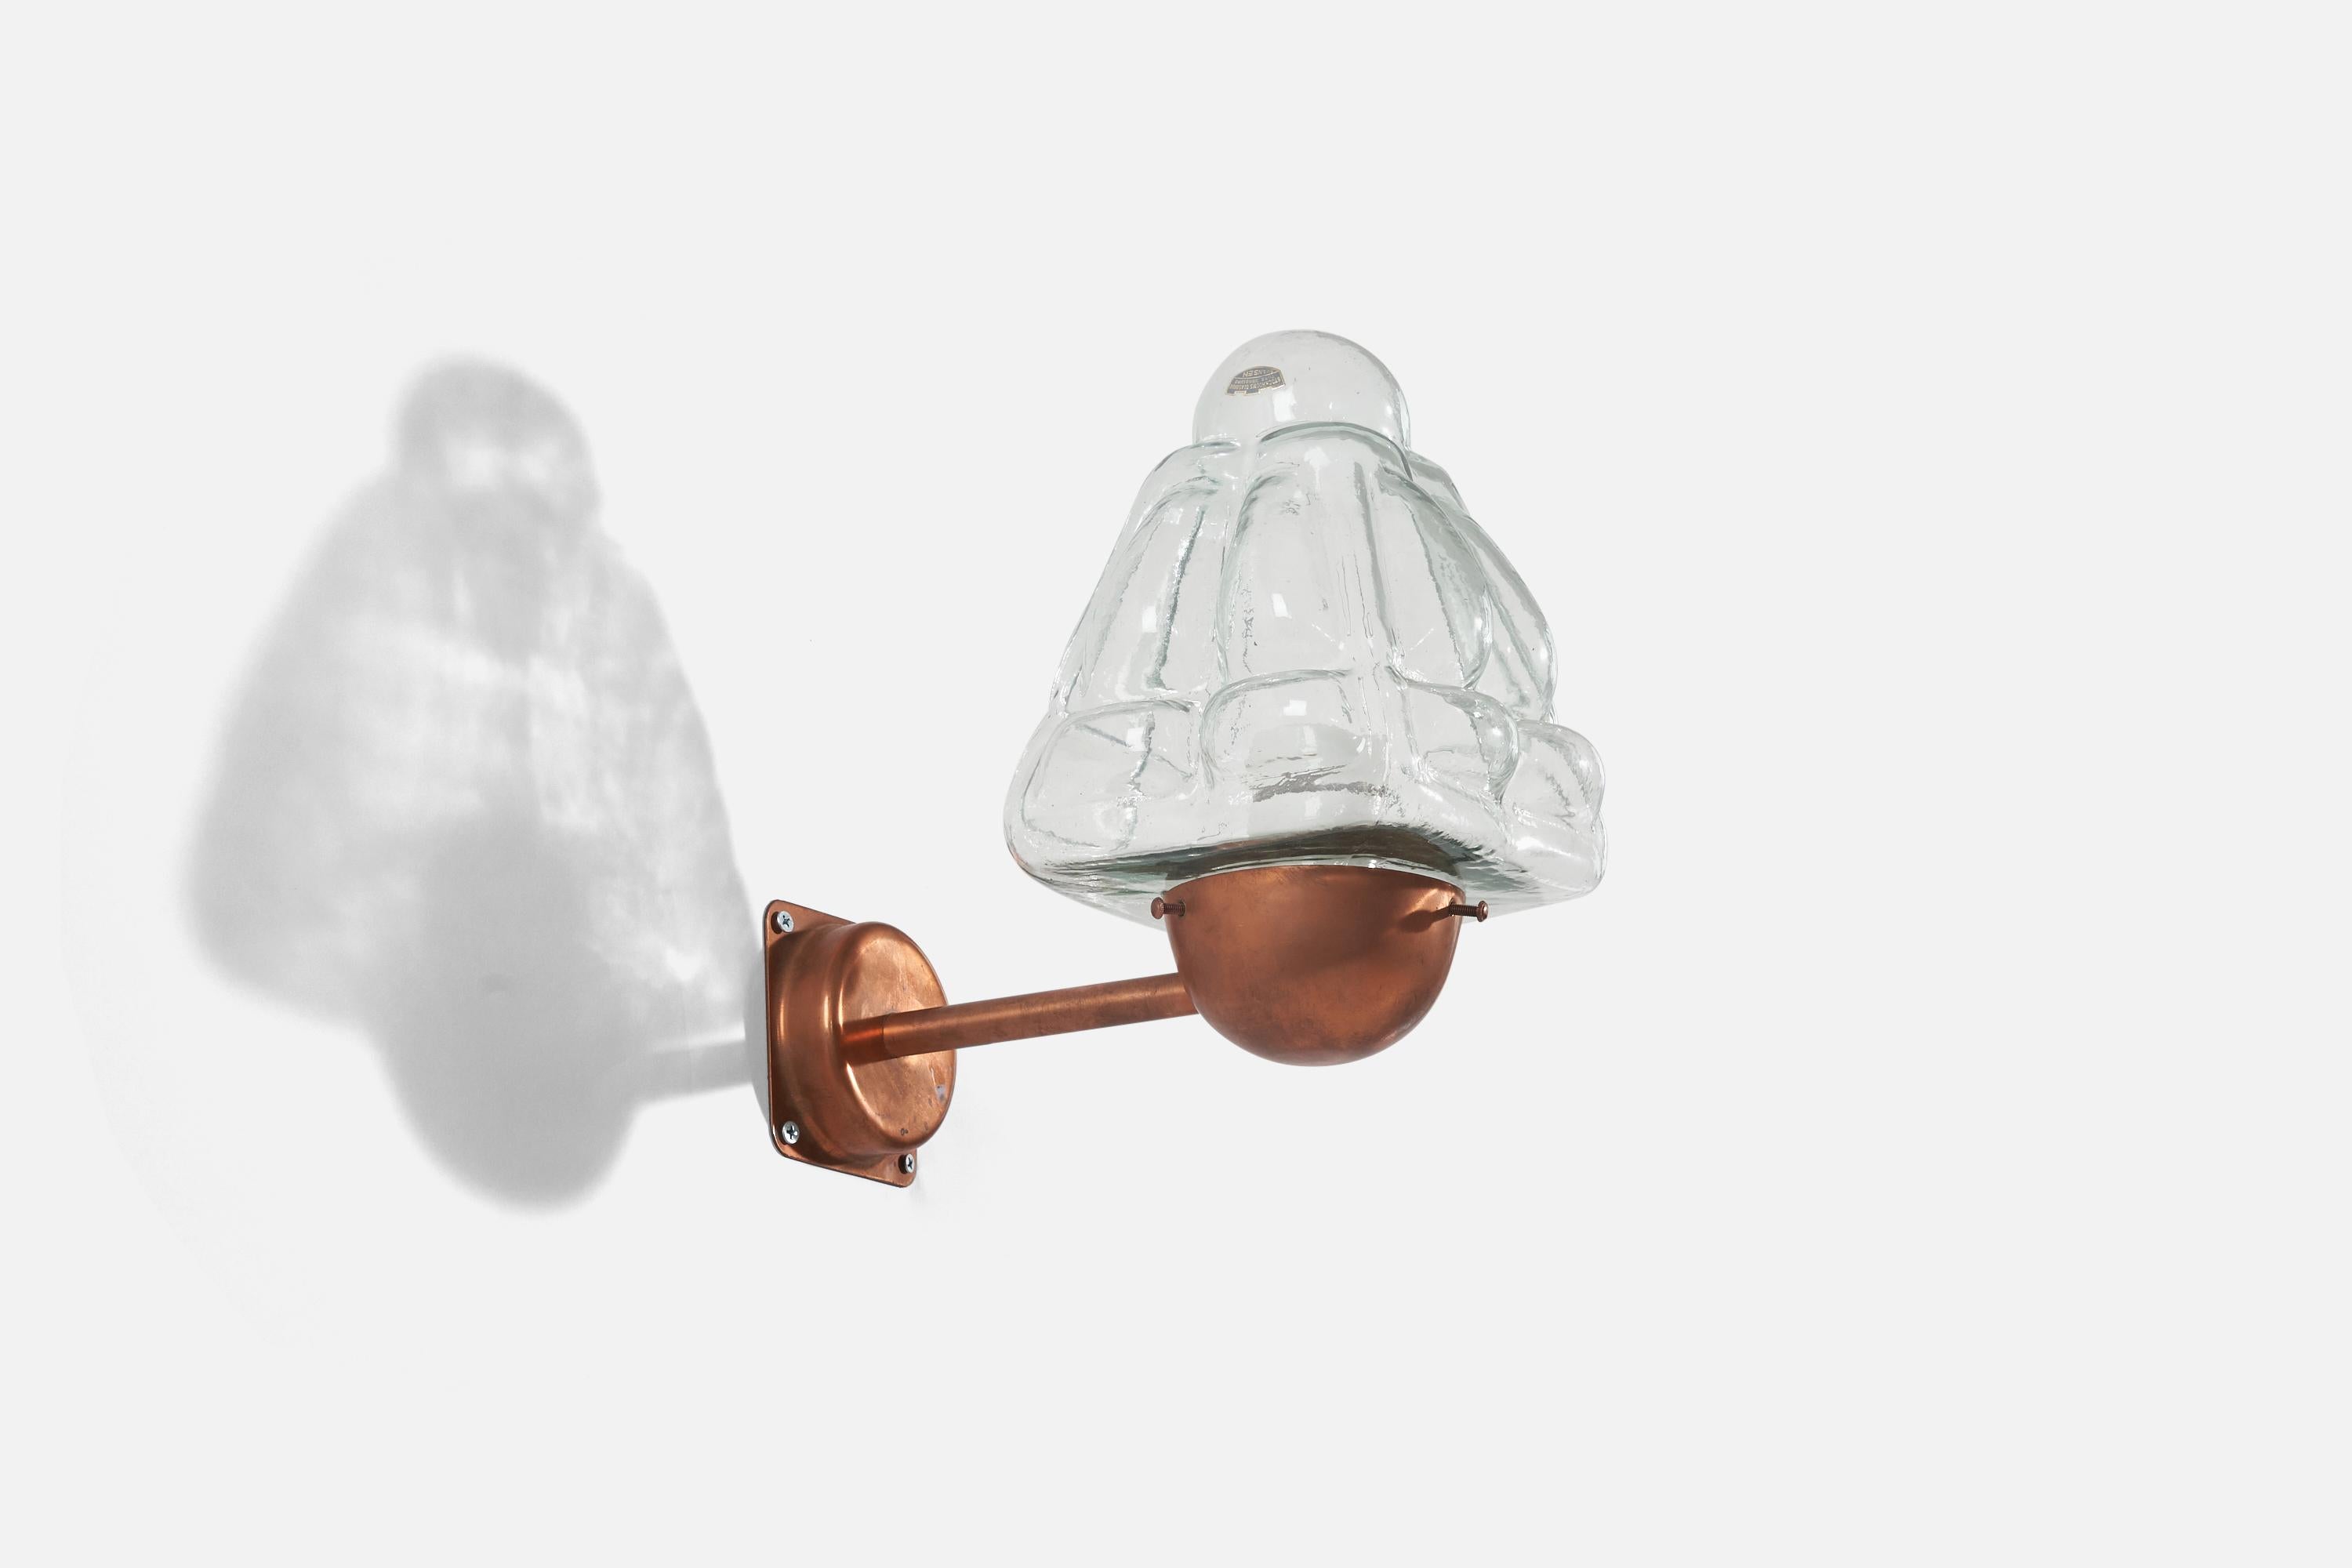 A copper and glass wall light designed and produced in Sweden, c. 1940s.

Dimensions of back plate (inches) : 3.68 x 3.68 x 1 (H x W x D).